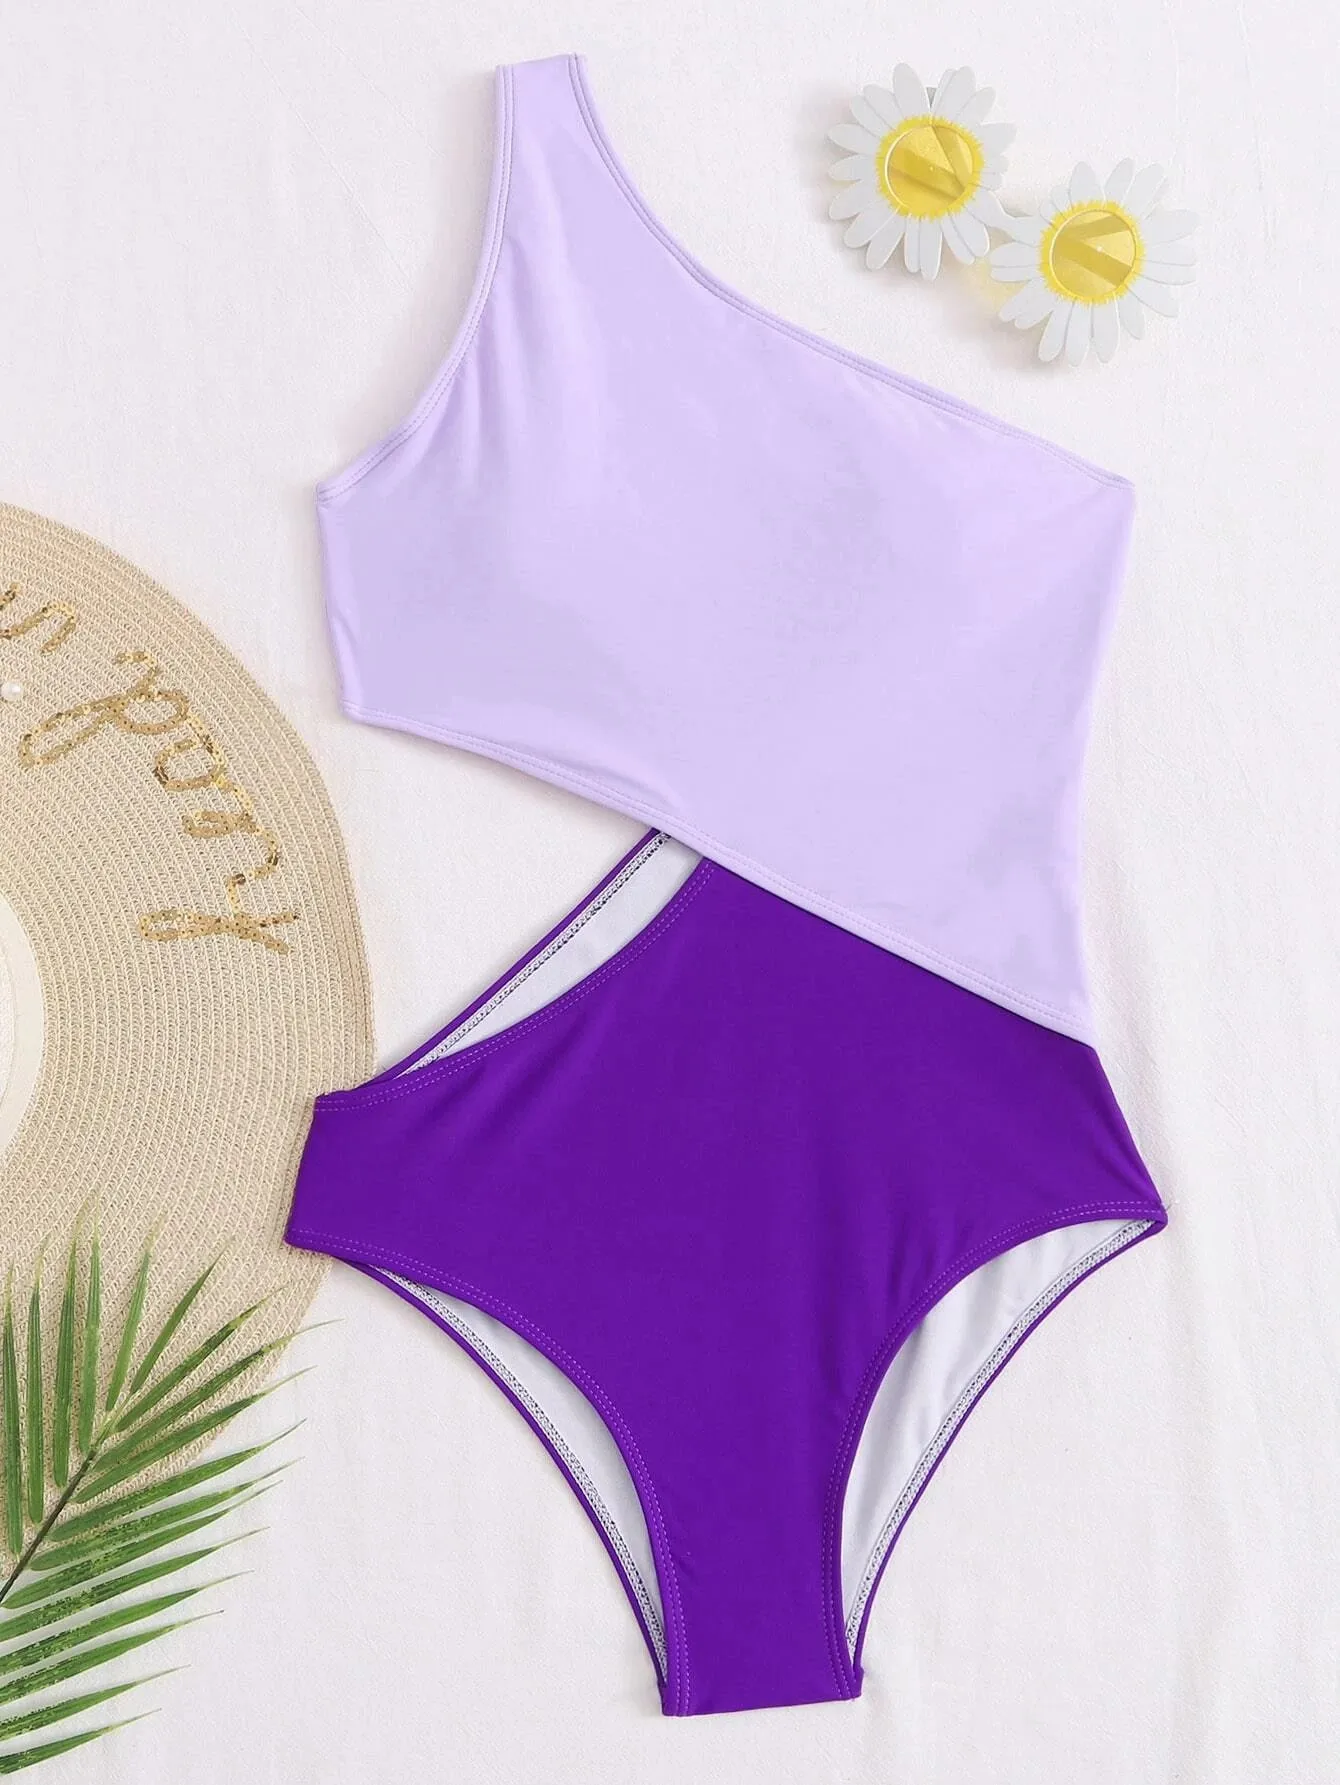 

Cut Out Patchwork One Piece Swimsuits 2021 One Shoulder Swimwear Women Belted Bodysuits Sexy Pink Purple Beachwear Bathers